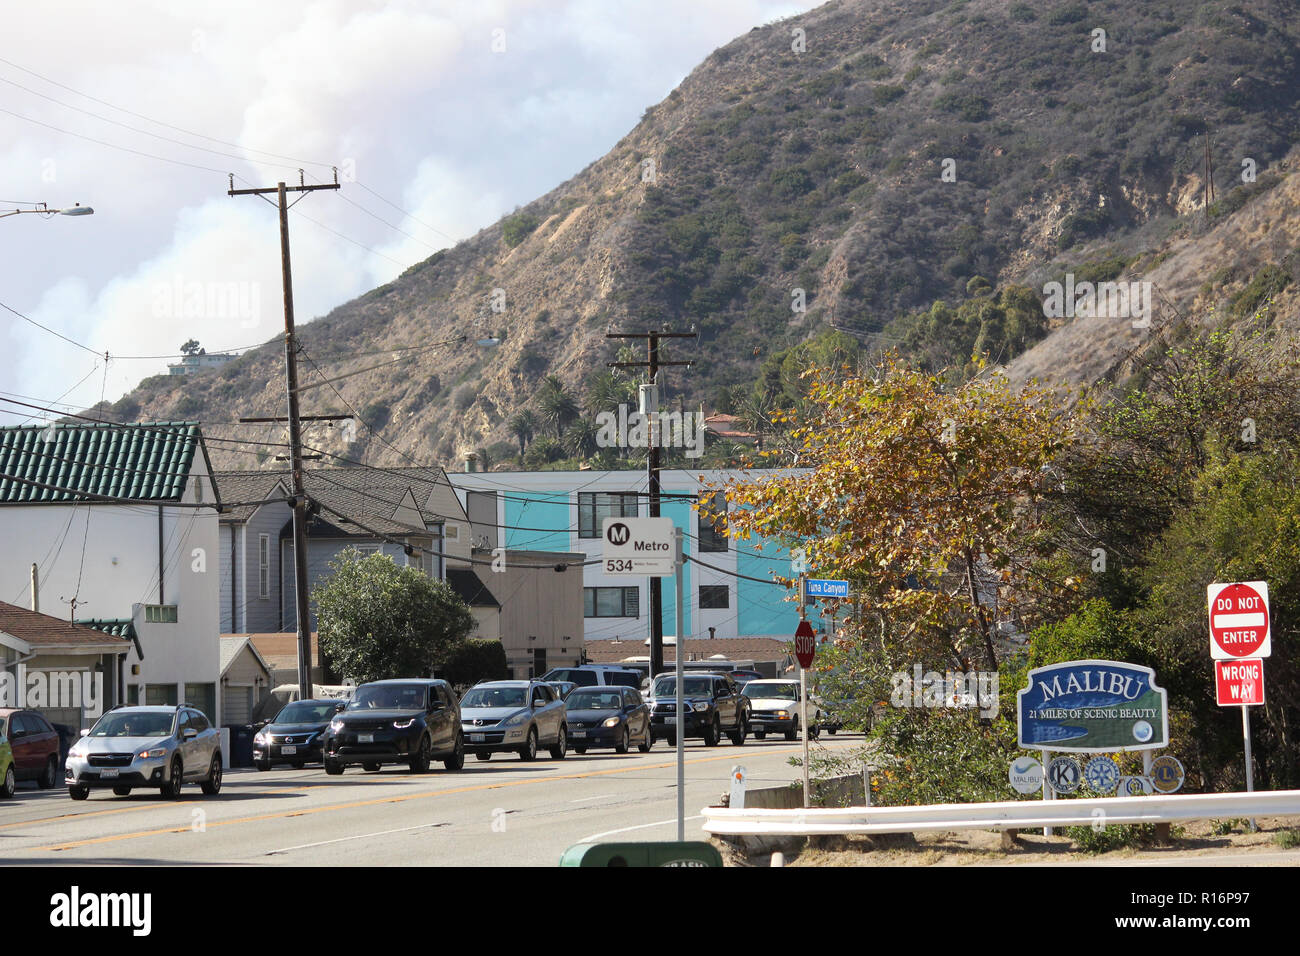 Malibu, USA: 9th November 2018. Malibu fires burn out of control as traffic is at a standstill along the Pacific Coast highway. Credit: Todd Felderstein/Alamy Live News Stock Photo